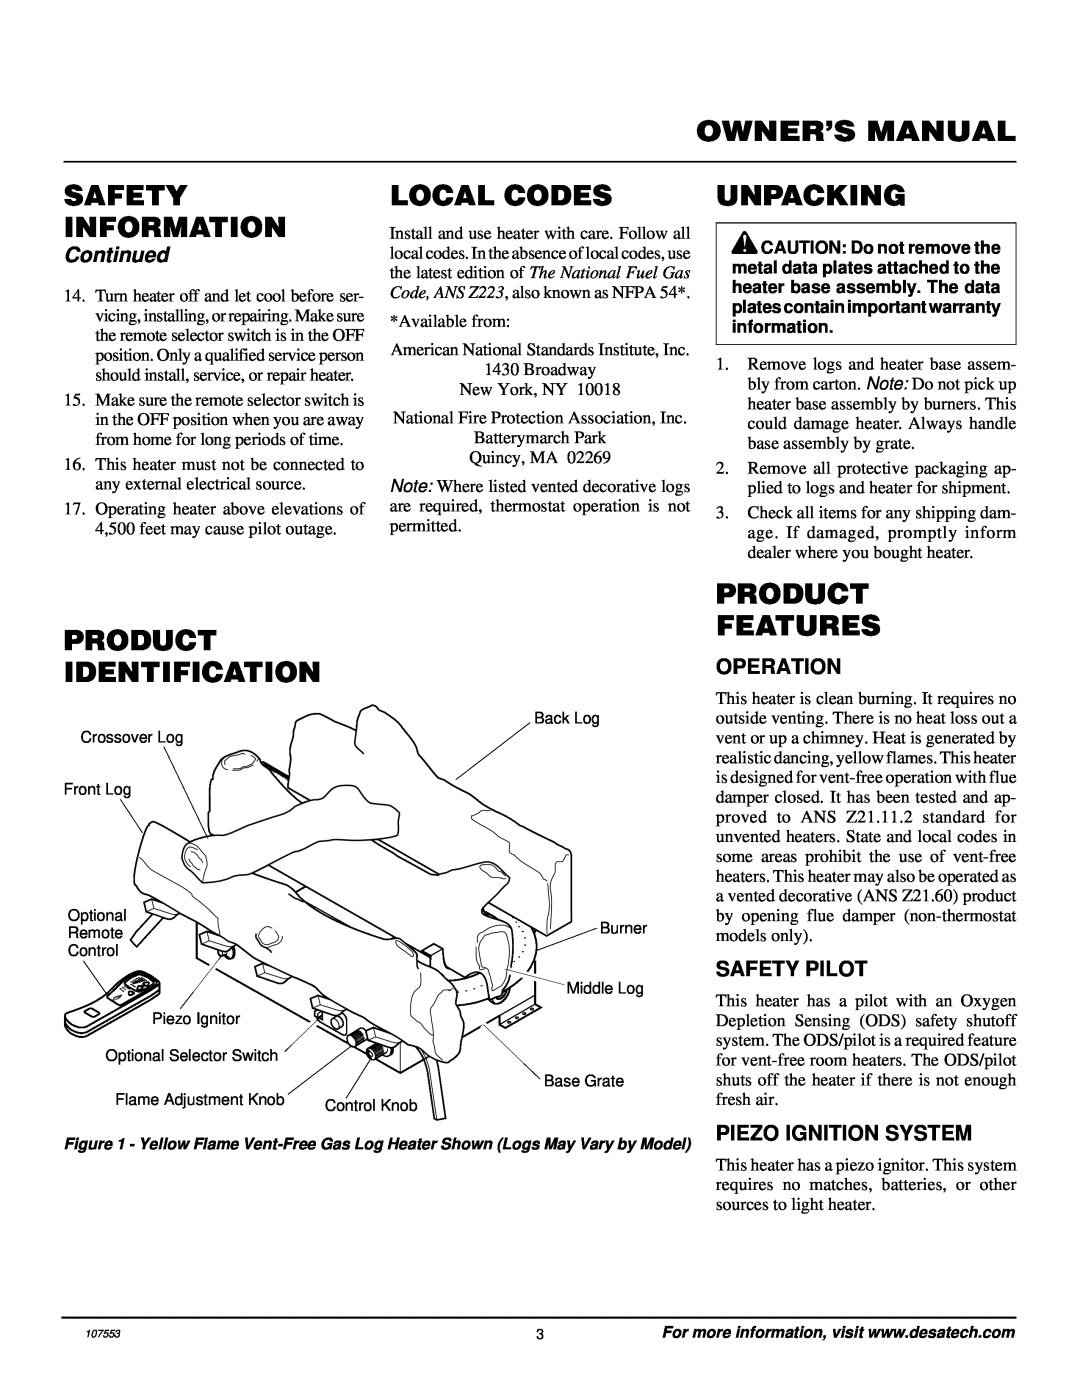 Desa CCL3924NR Local Codes, Unpacking, Product Identification, Product Features, Continued, Operation, Safety Pilot 